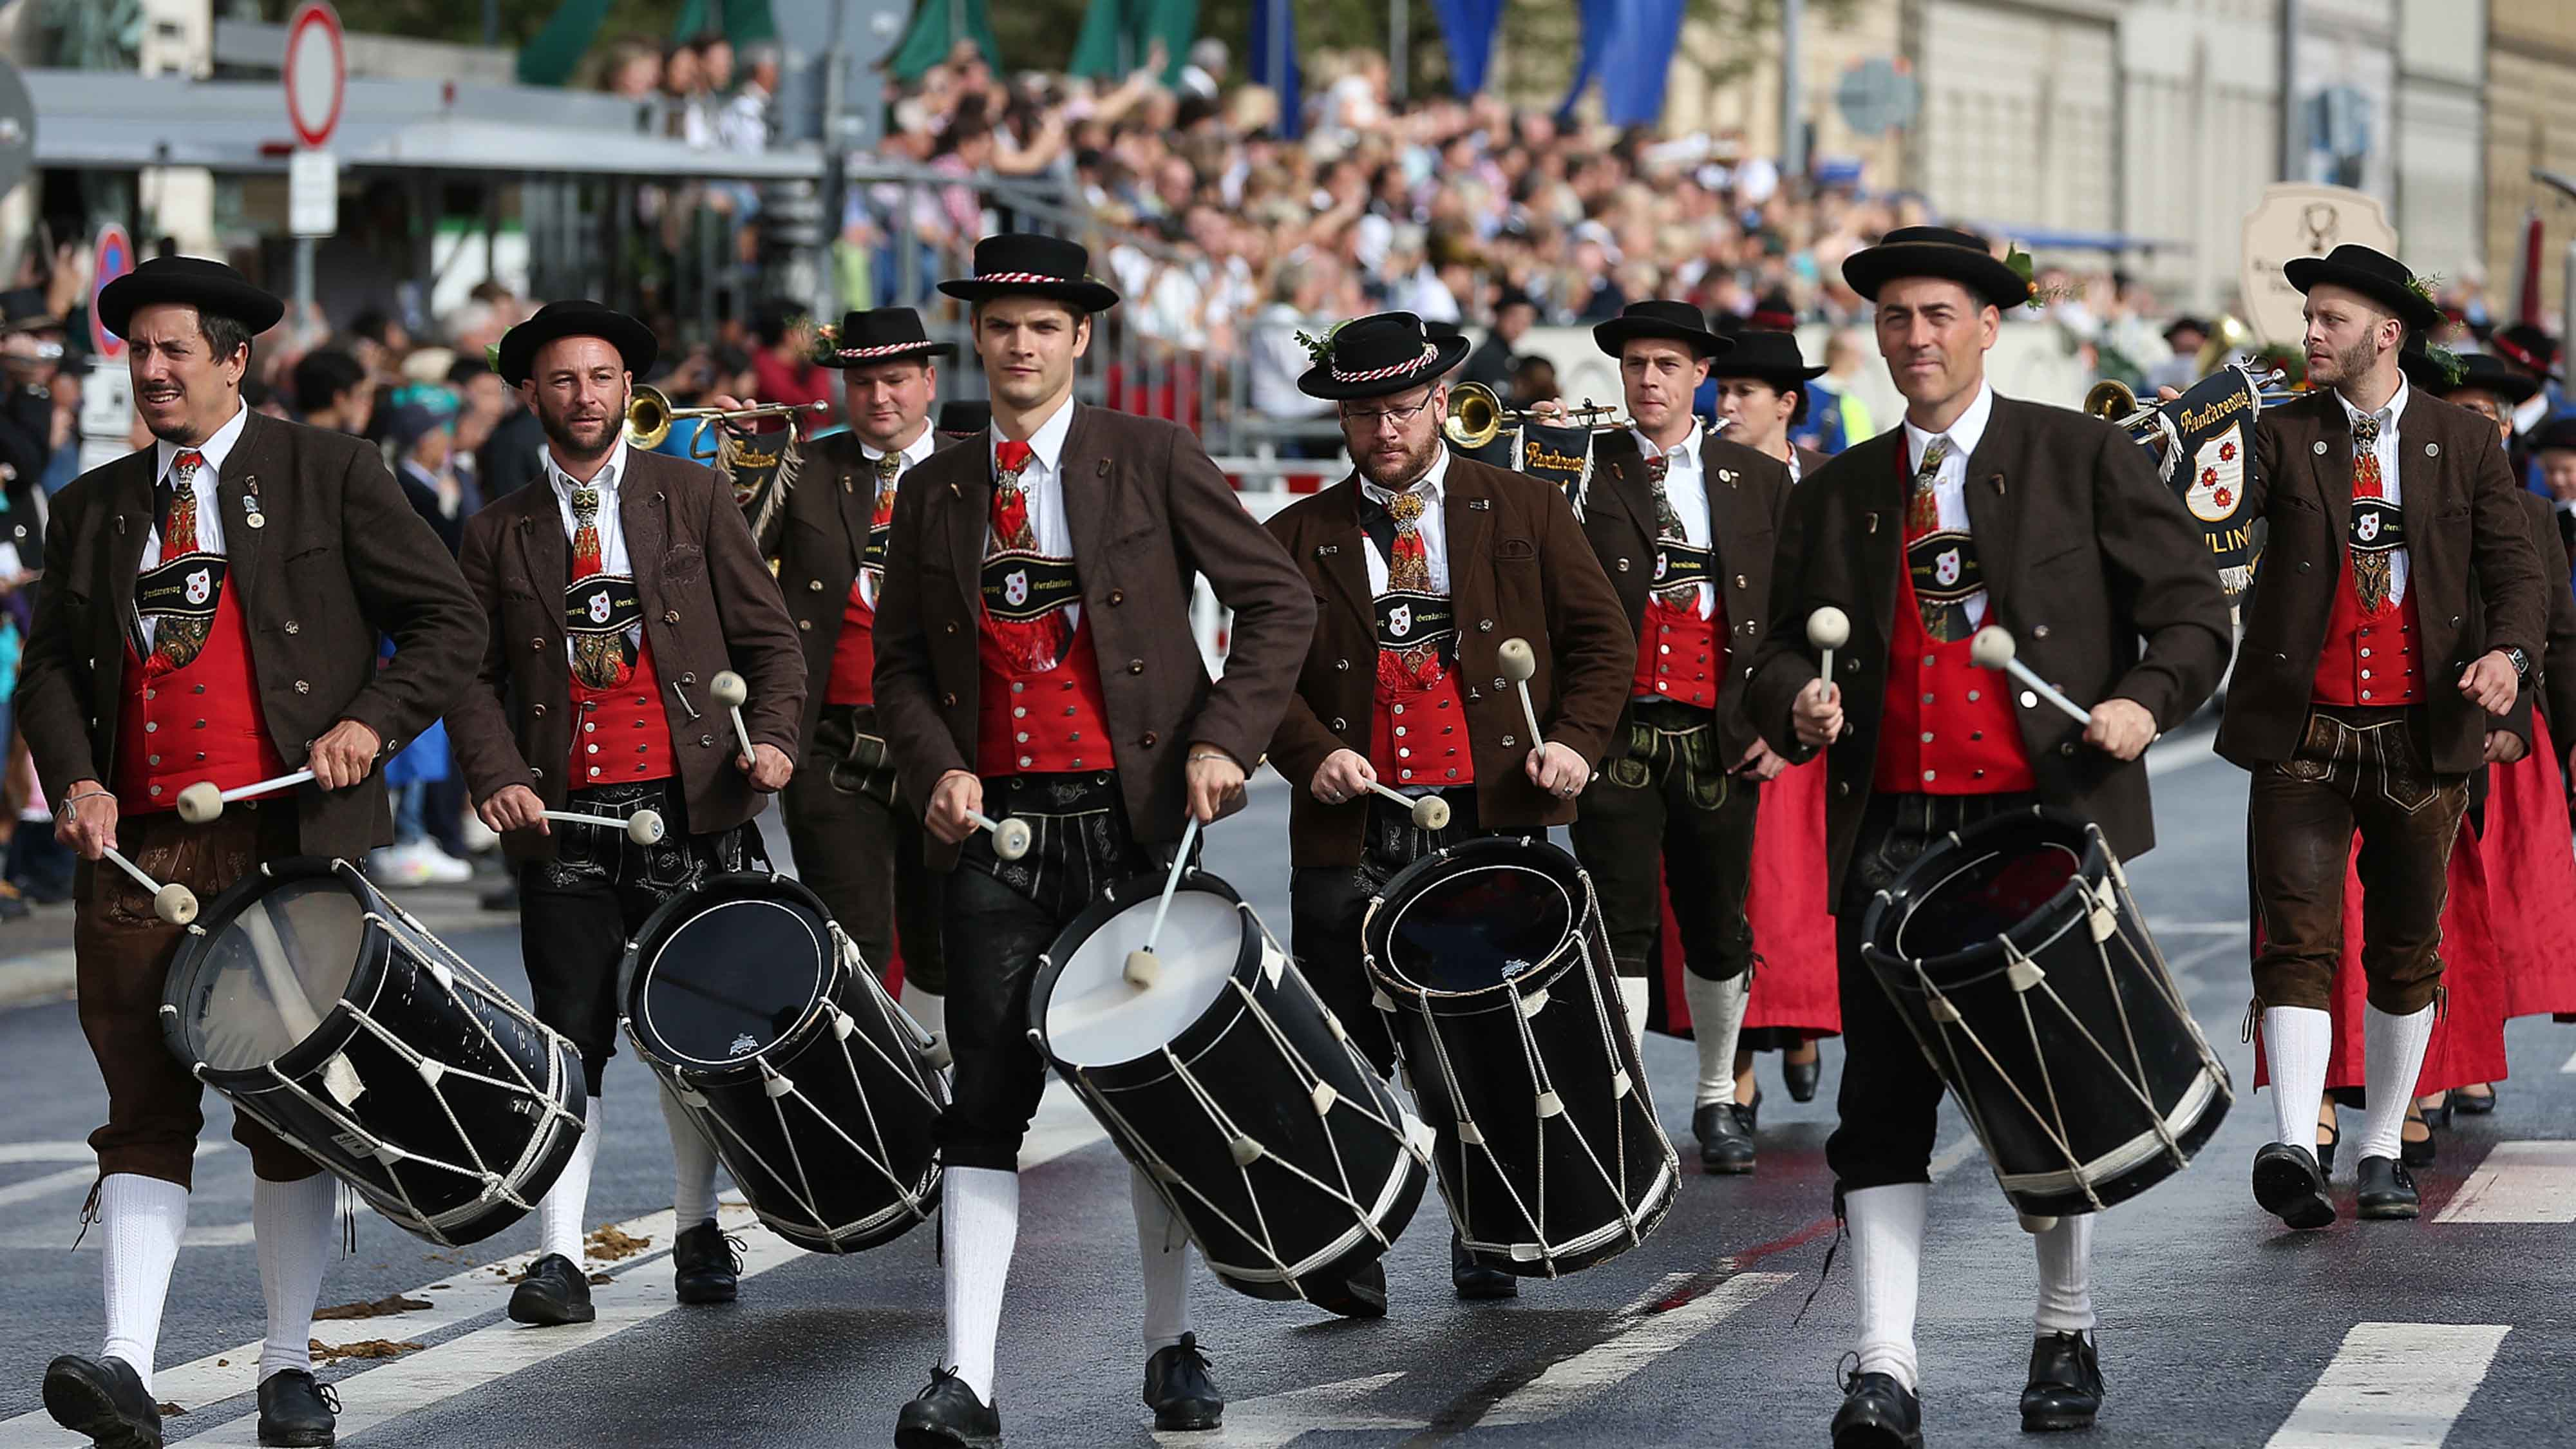 Hundreds of proud Bavarians wore their finest traditional clothes on